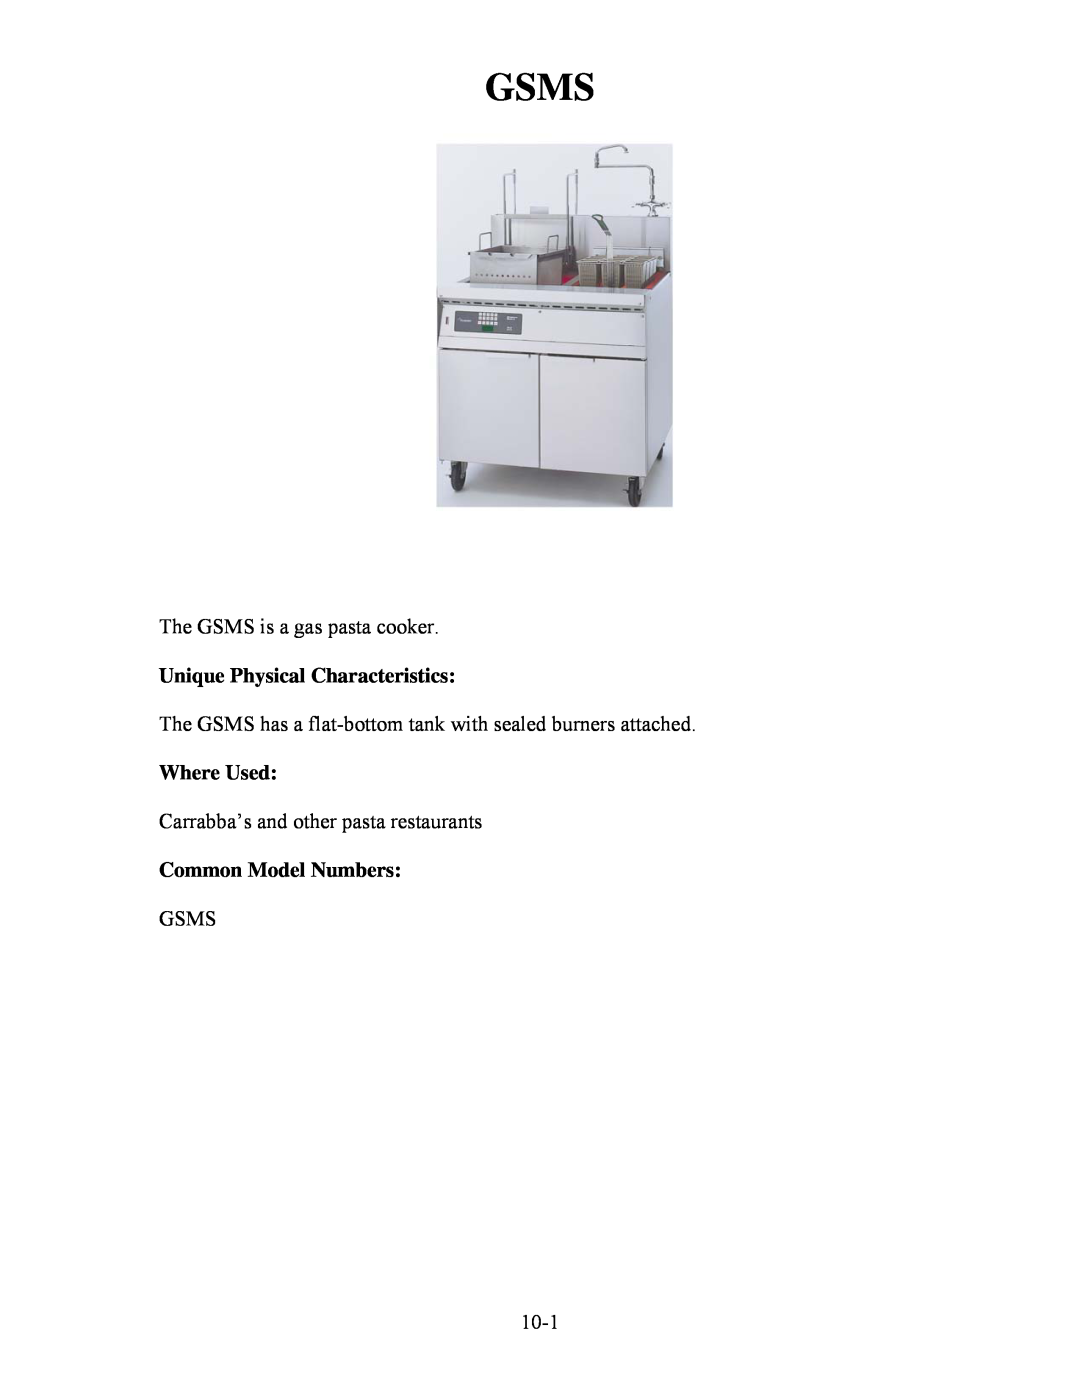 Frymaster H50 Gsms, The GSMS is a gas pasta cooker, The GSMS has a flat-bottom tank with sealed burners attached, 10-1 